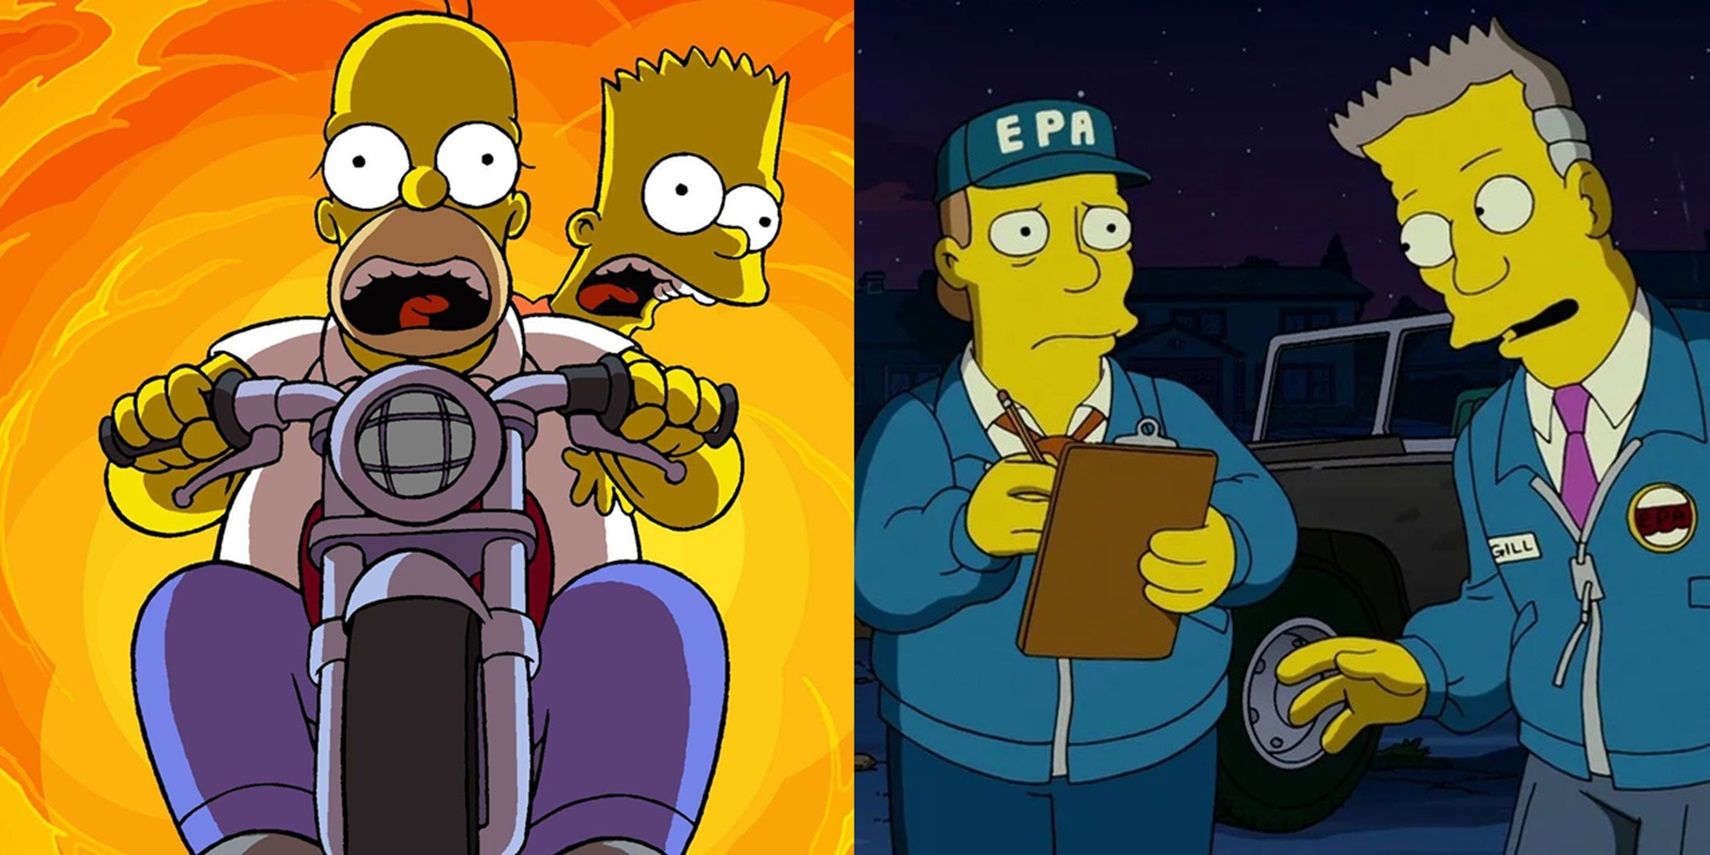 The Simpsons Movie: The 10 Funniest Scenes